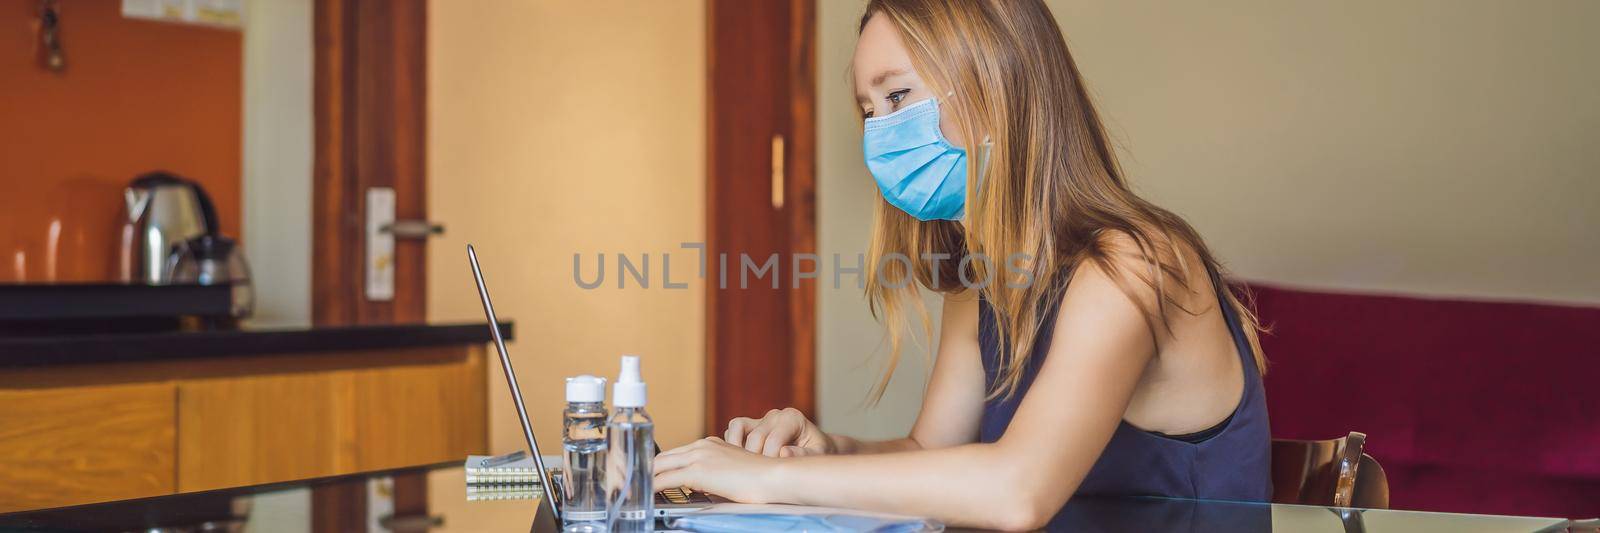 Coronavirus. Young business woman working from home wearing protective mask. Business woman in quarantine for coronavirus wearing protective mask. Working from home. BANNER, LONG FORMAT